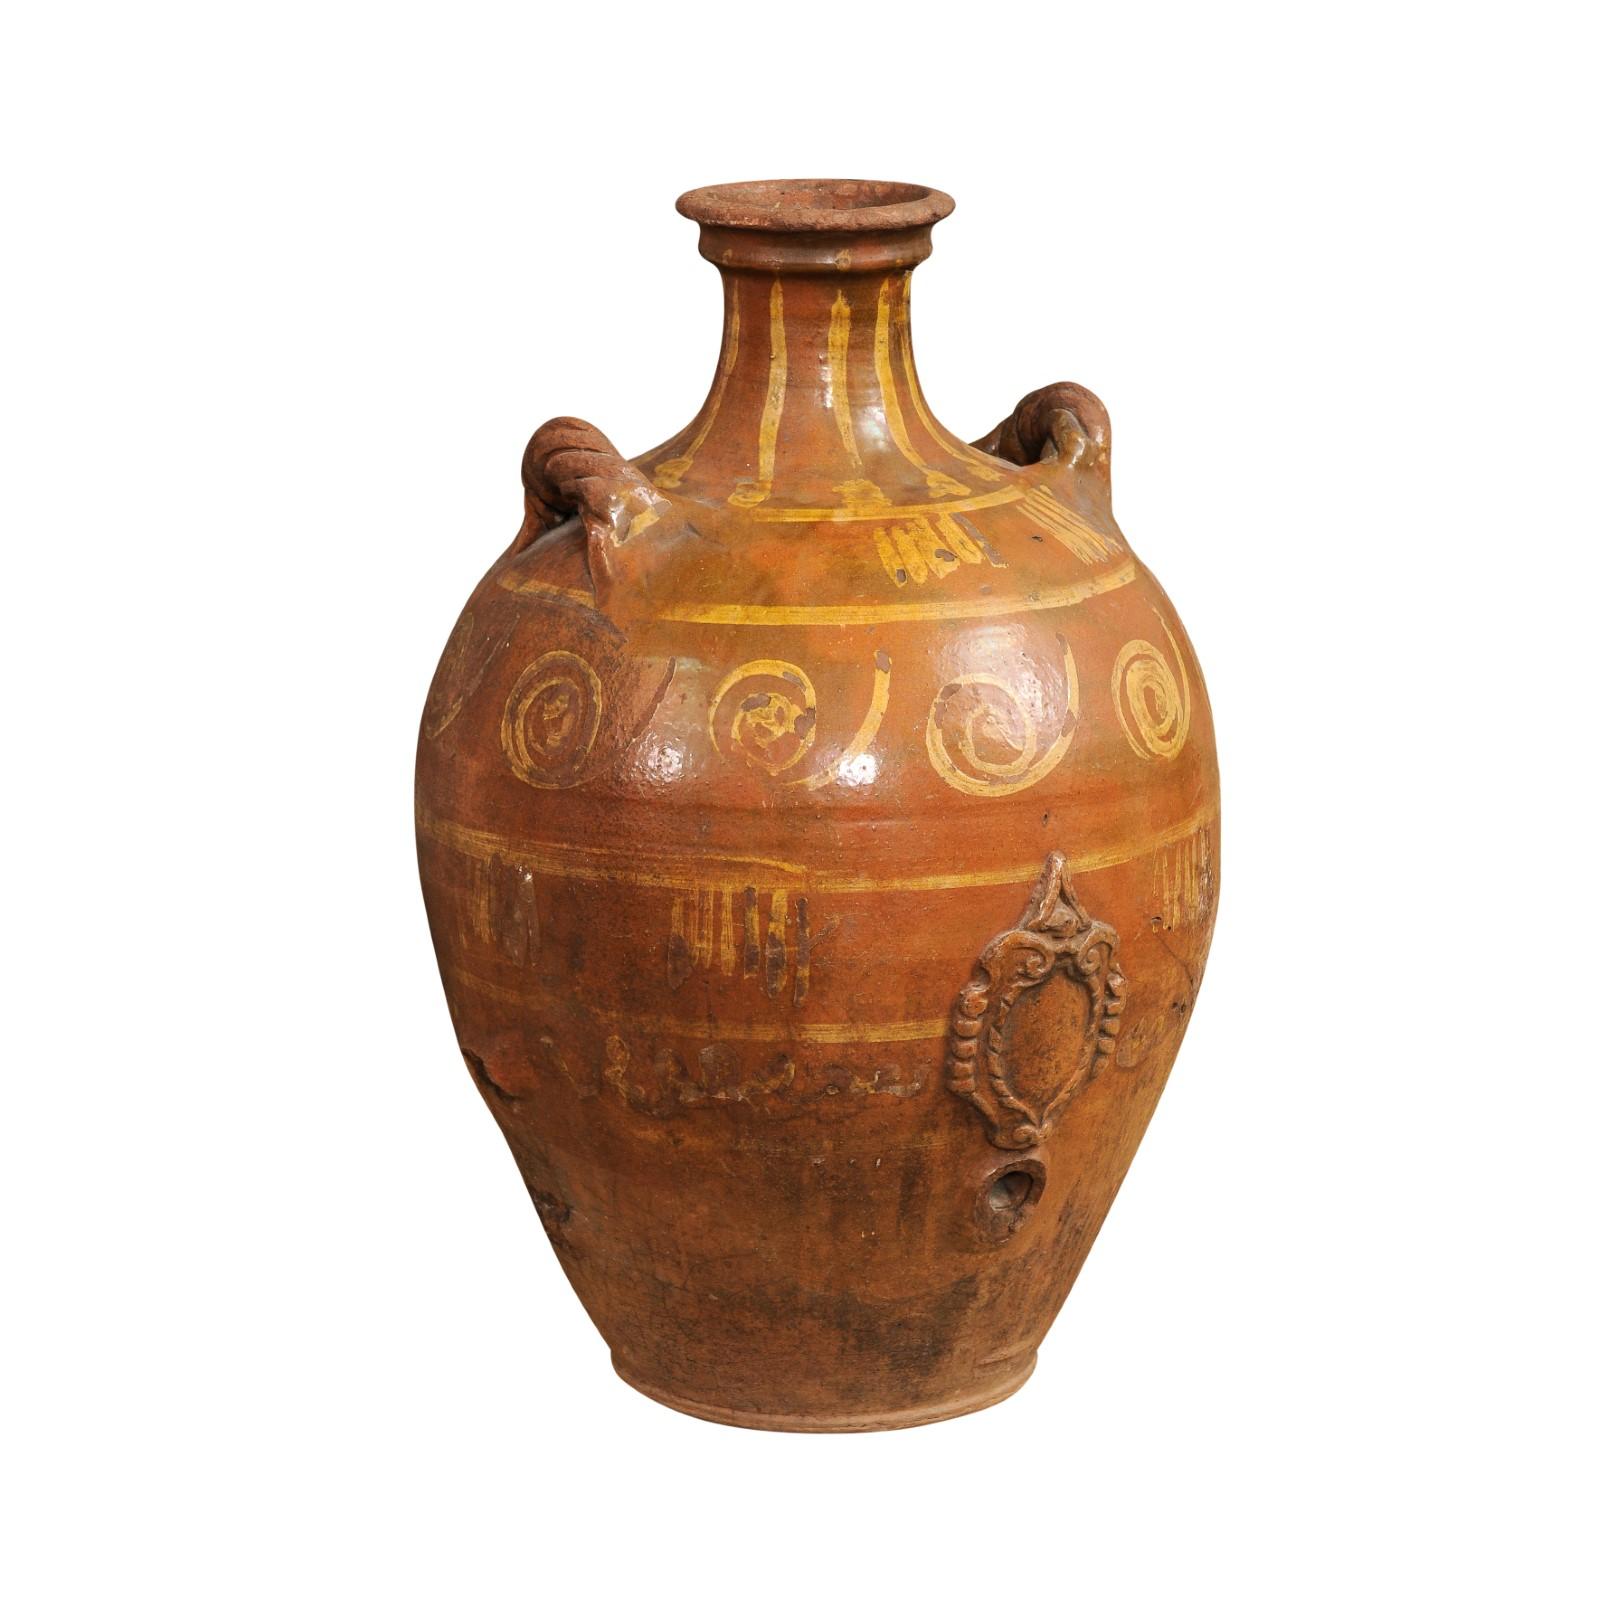 An Italian terracotta olive oil jar from the 17th century, with yellow glazed spiraling décor, raised motif and twisted lateral handles. Created in Italy during the 17th century, this terracotta olive jar features a brown ground highlighted by a